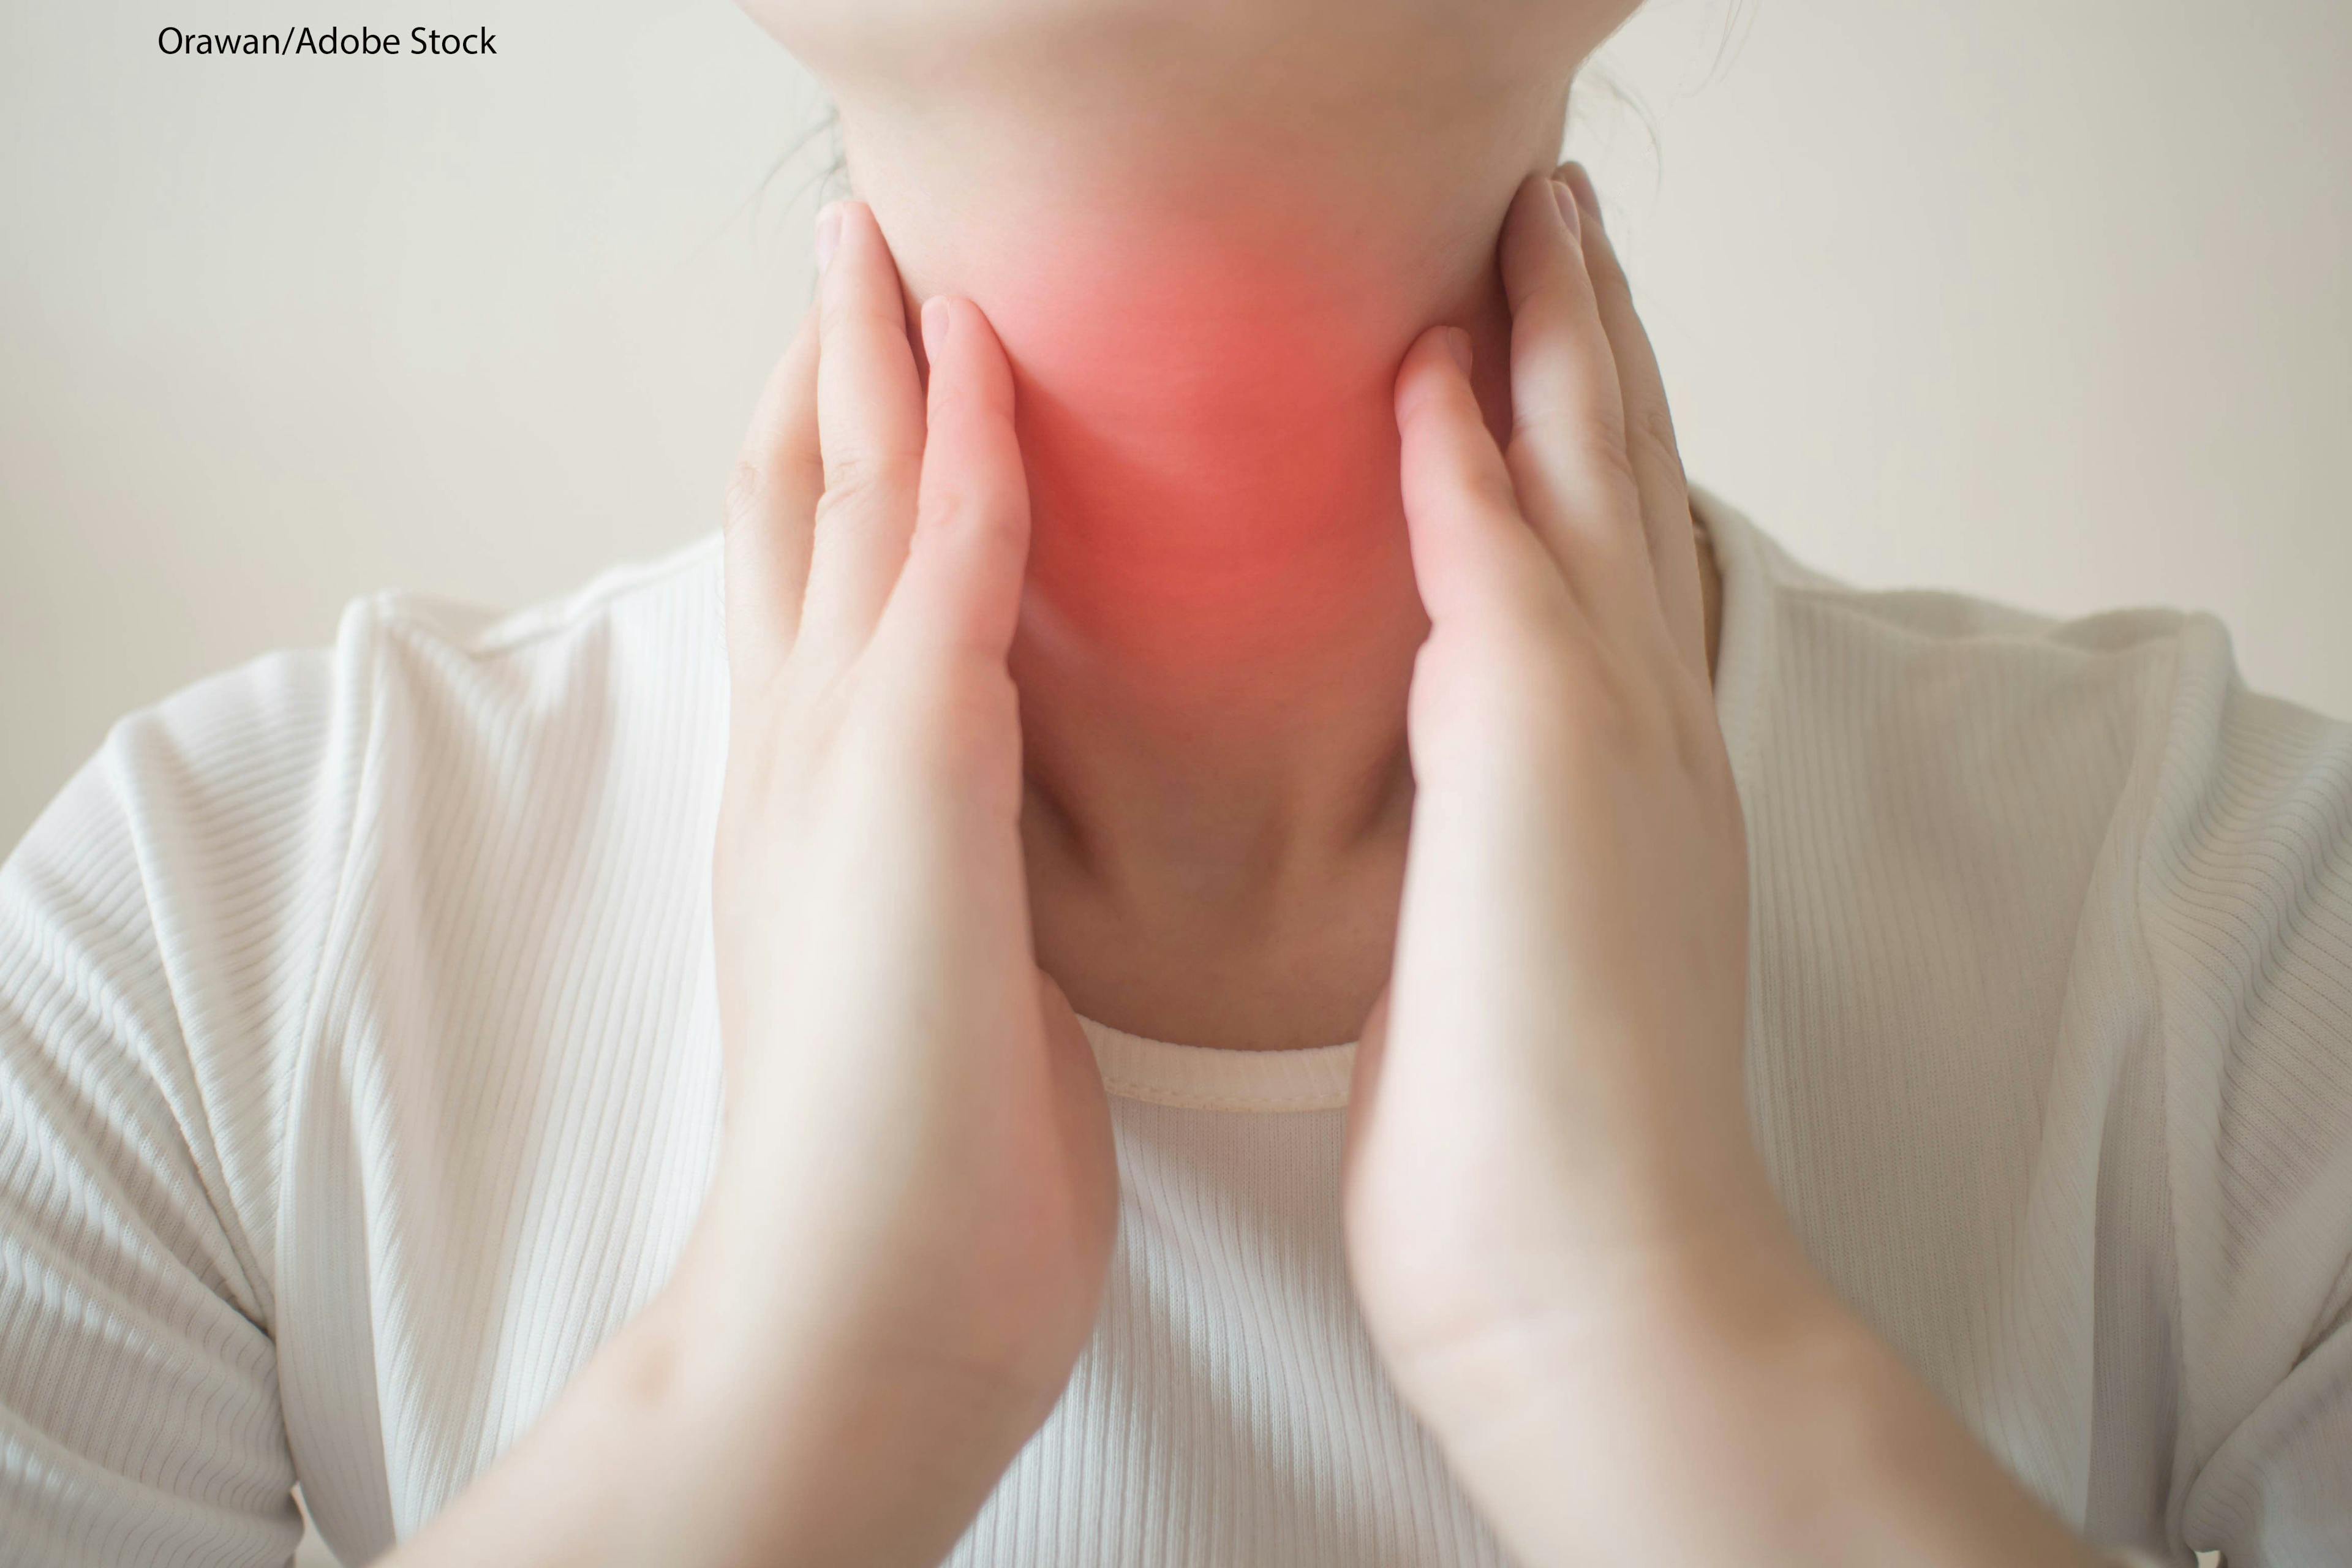 Is There a Link Between Graves’ Disease and Thyroid Cancer?